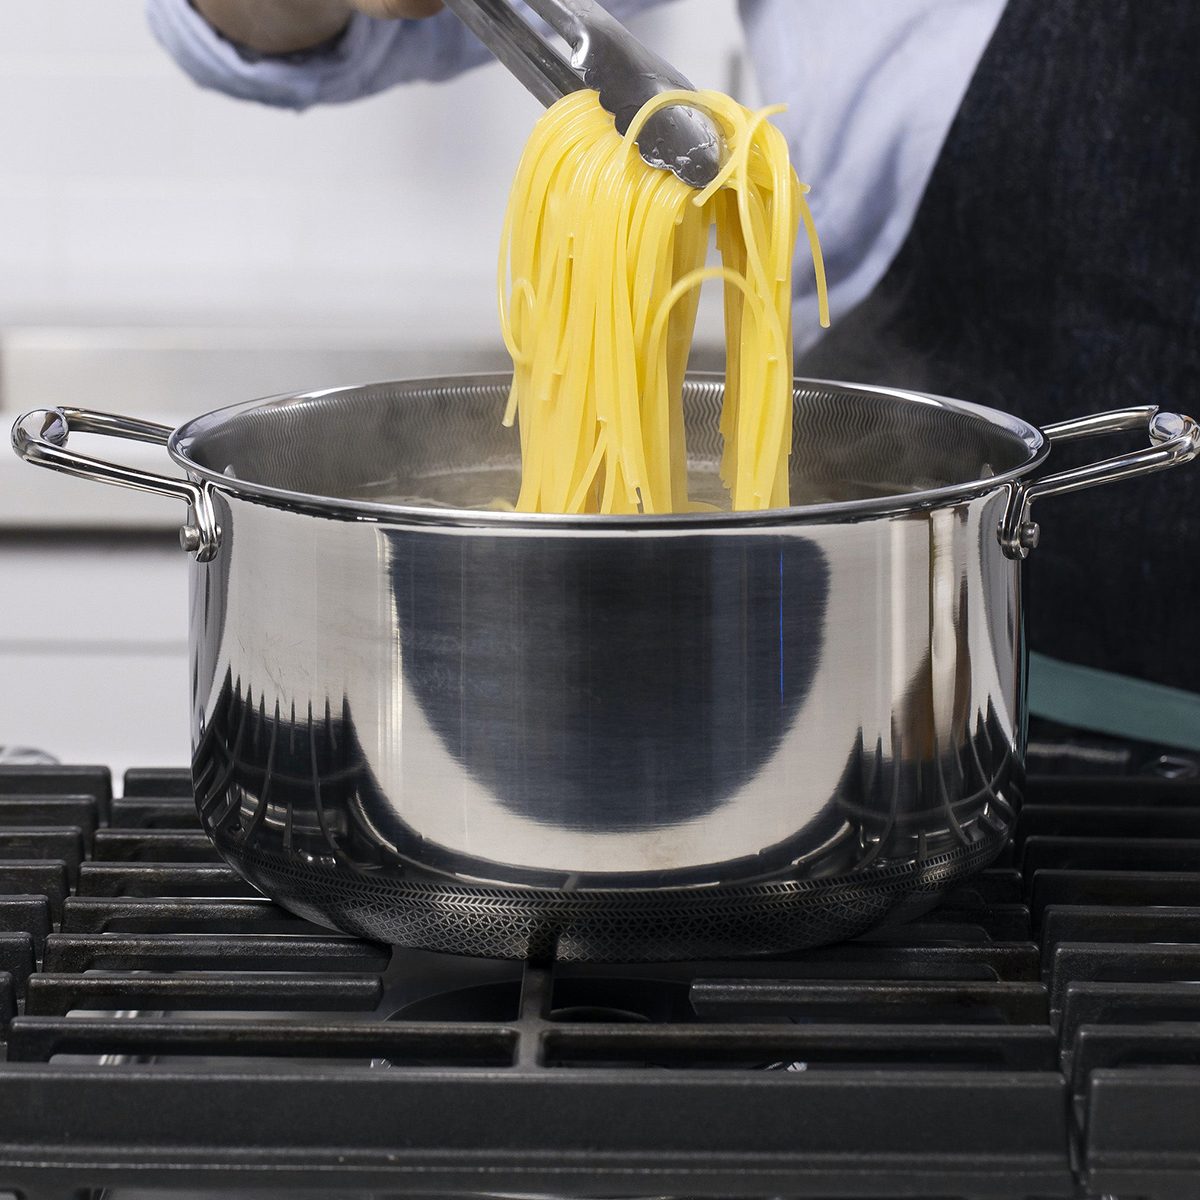 HexClad Sale 2023  Save Up to 40% on Chef-Approved Hybrid Cookware